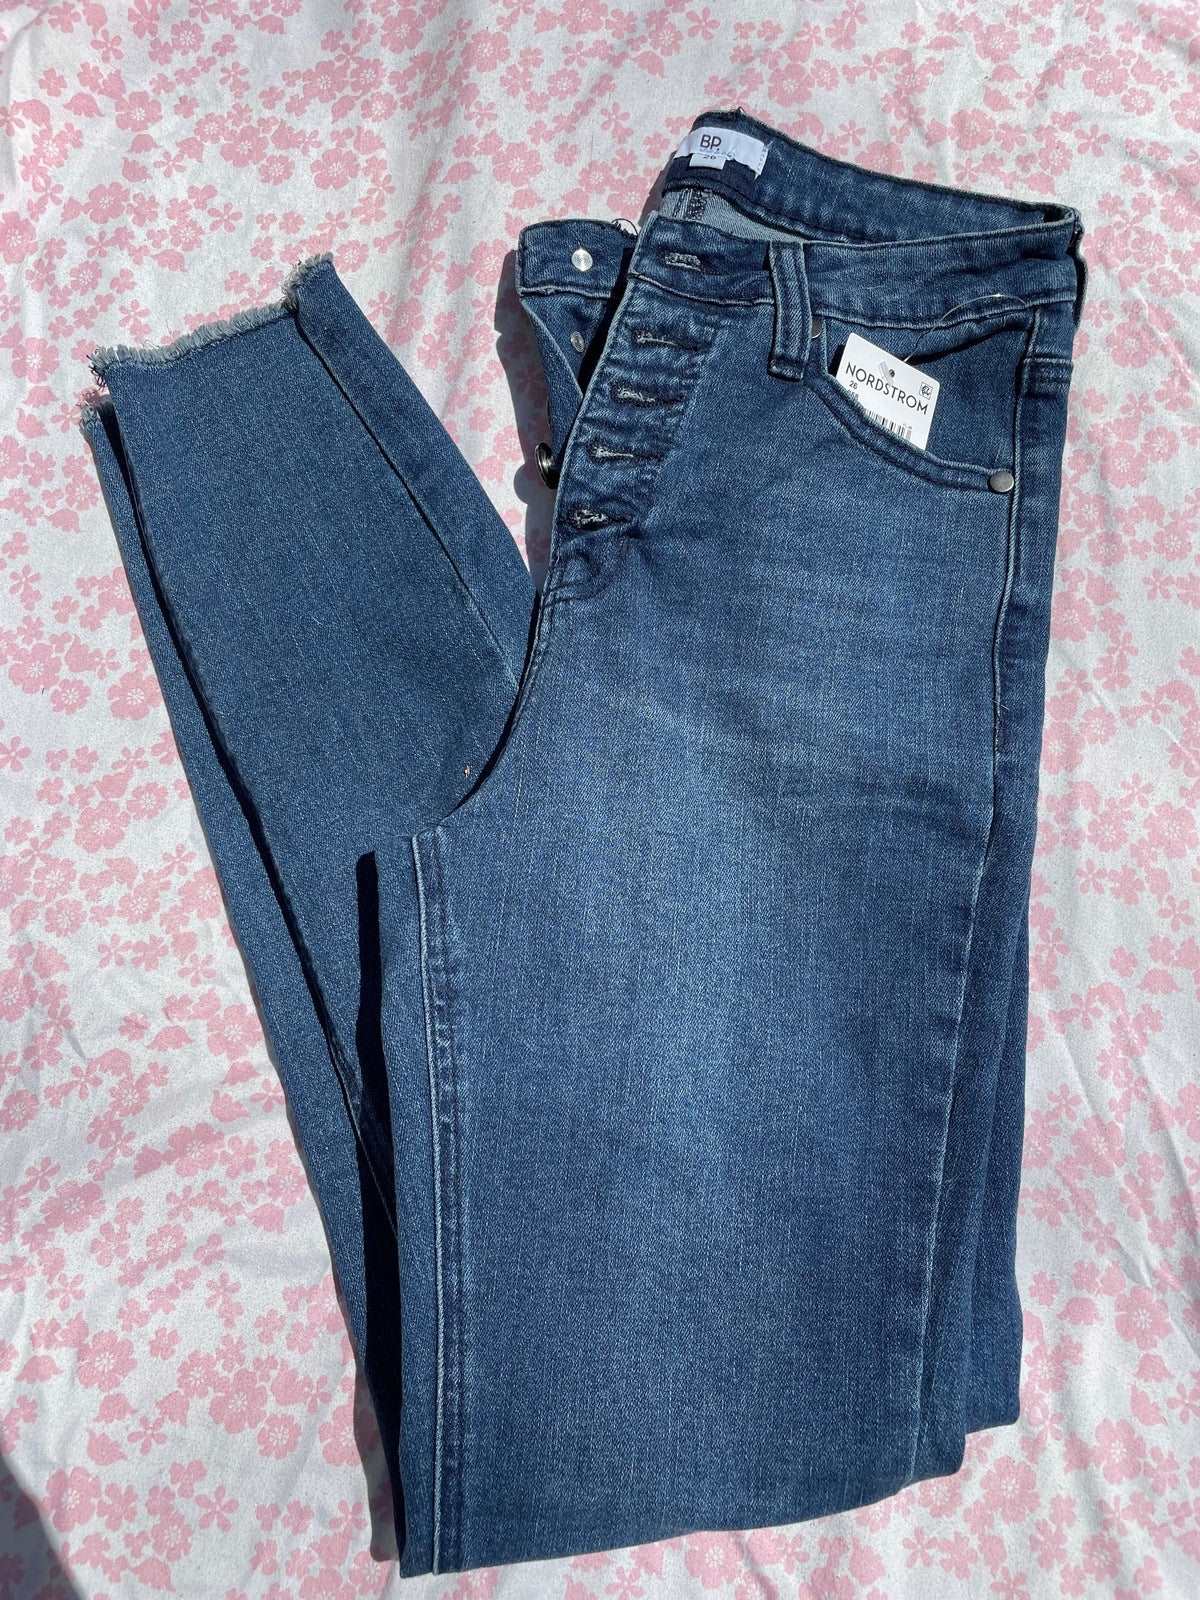 ThriftedEquestrian Clothing 26 BP button front high rise Skinny Jeans NWT - 26